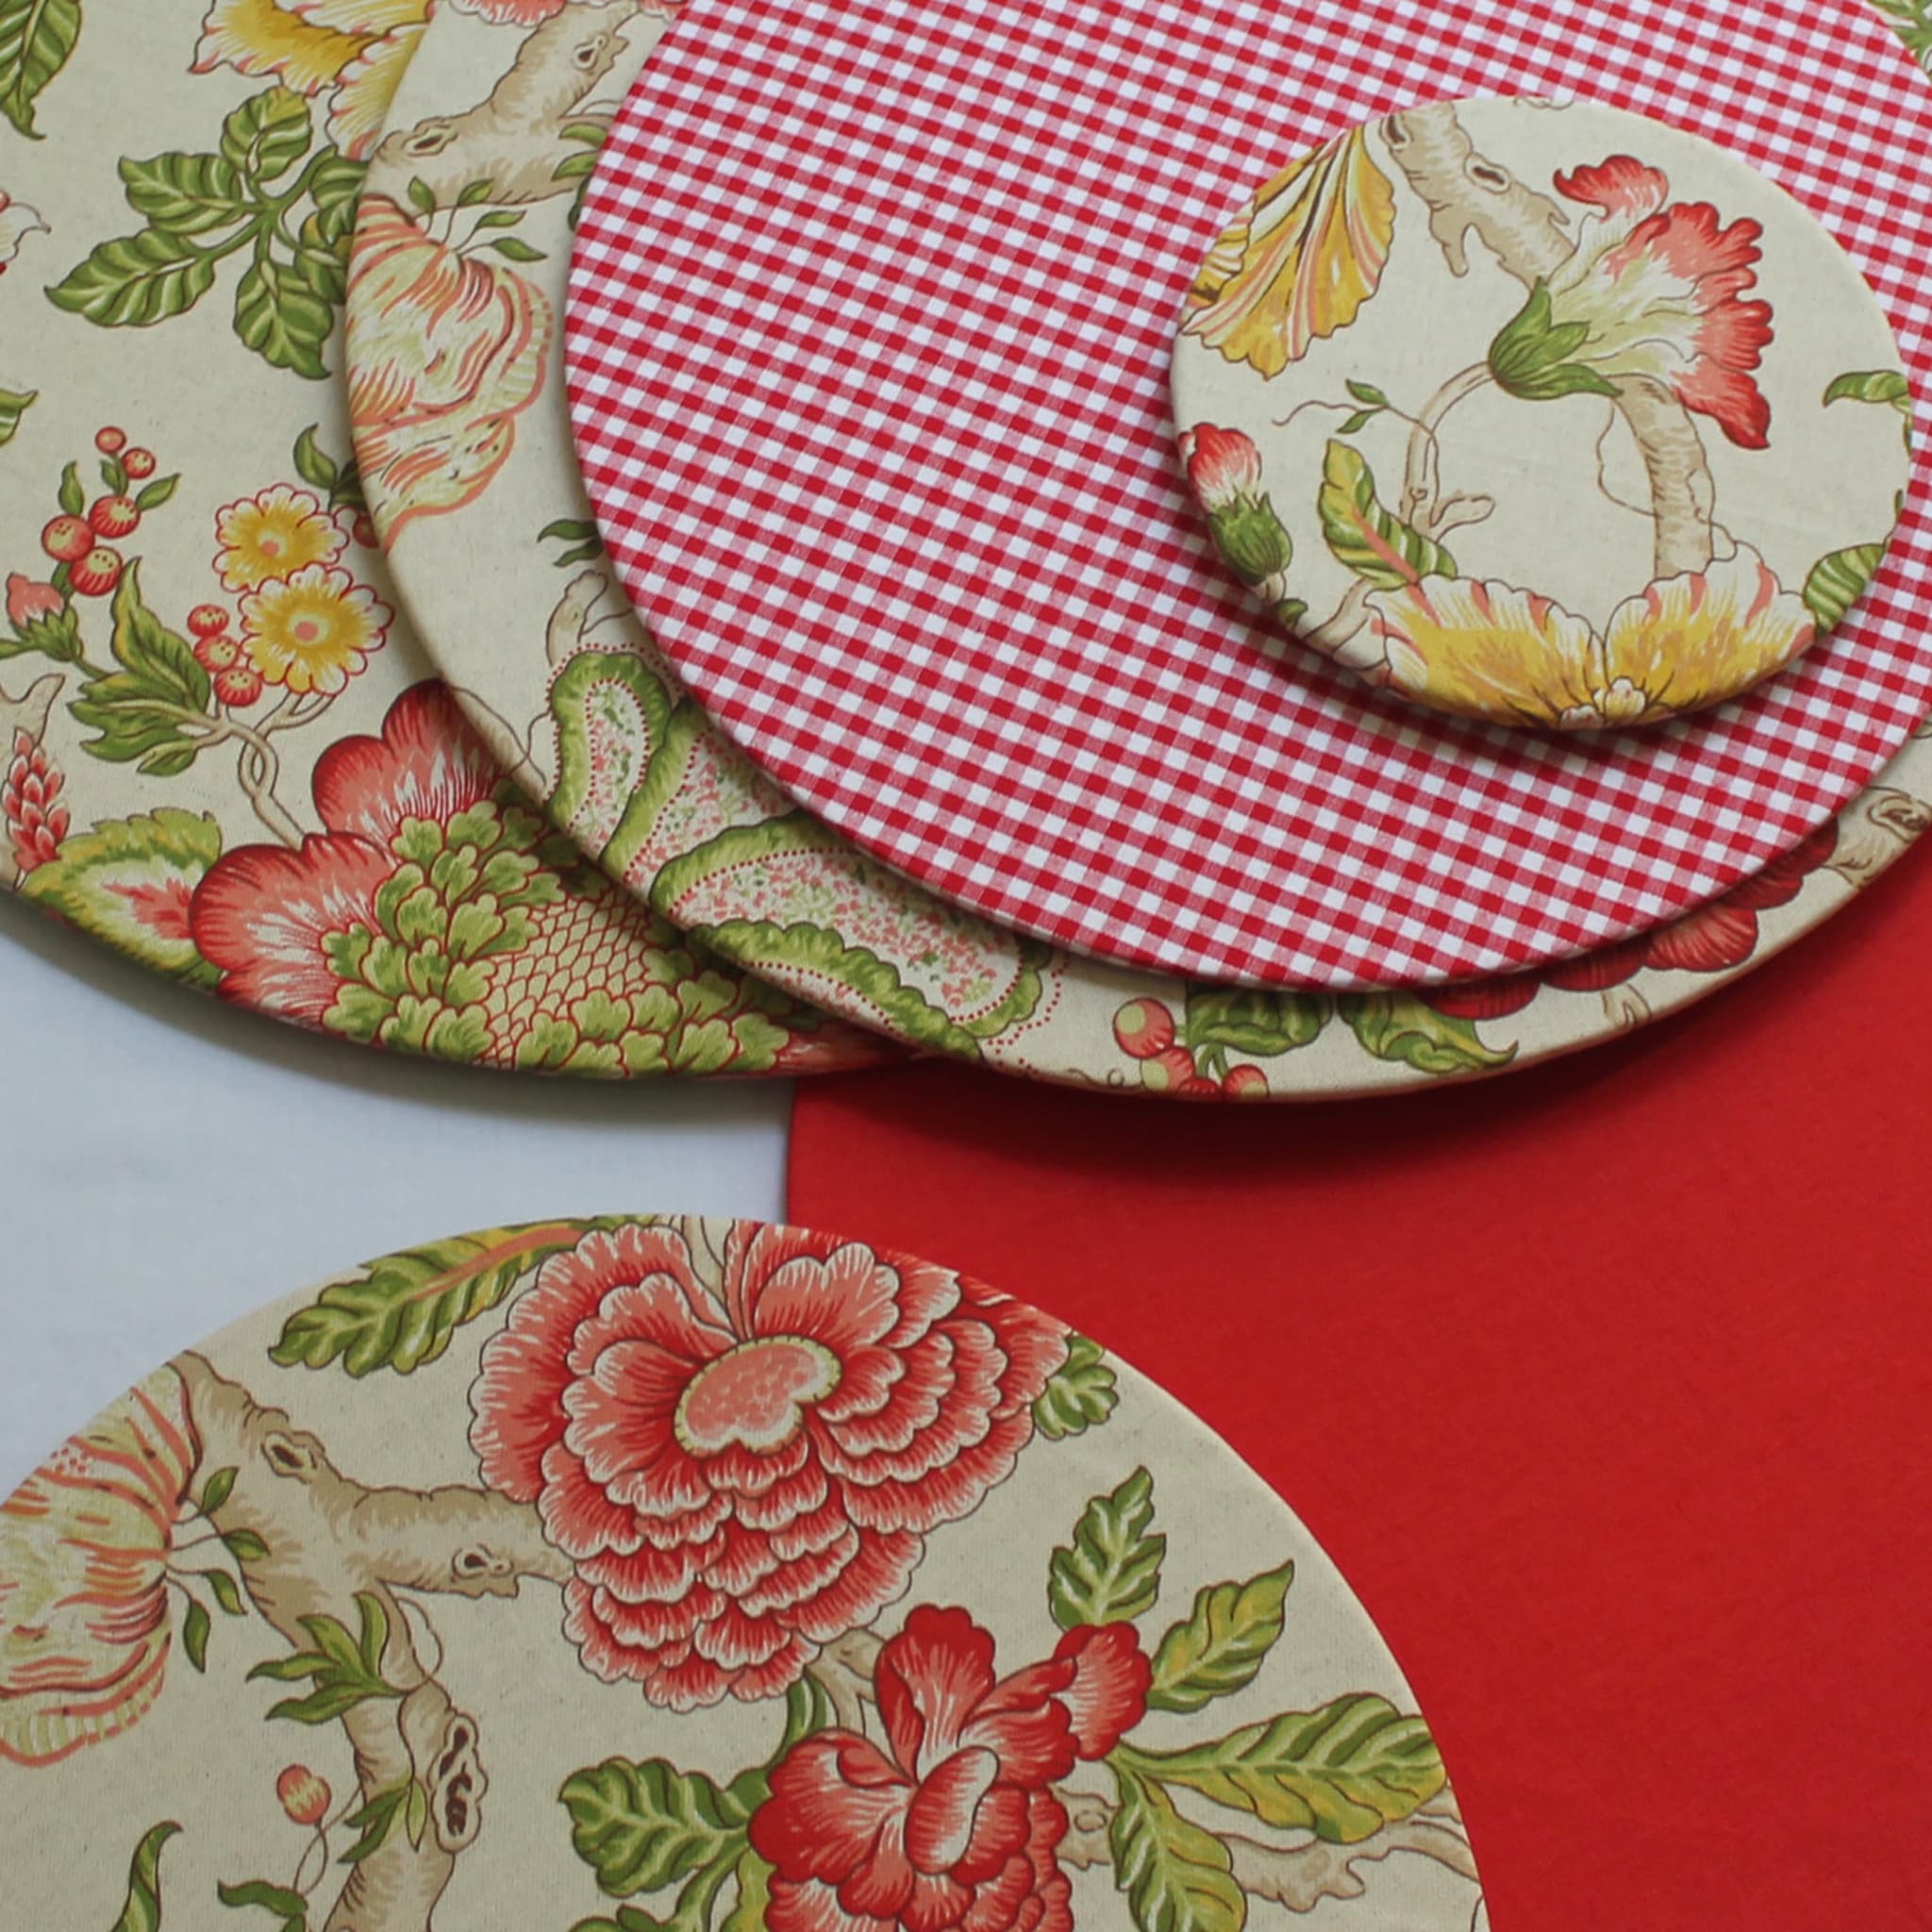 Set of 2 Cuffiette Extra-Small Round Floral Placemats #1 - Alternative view 2